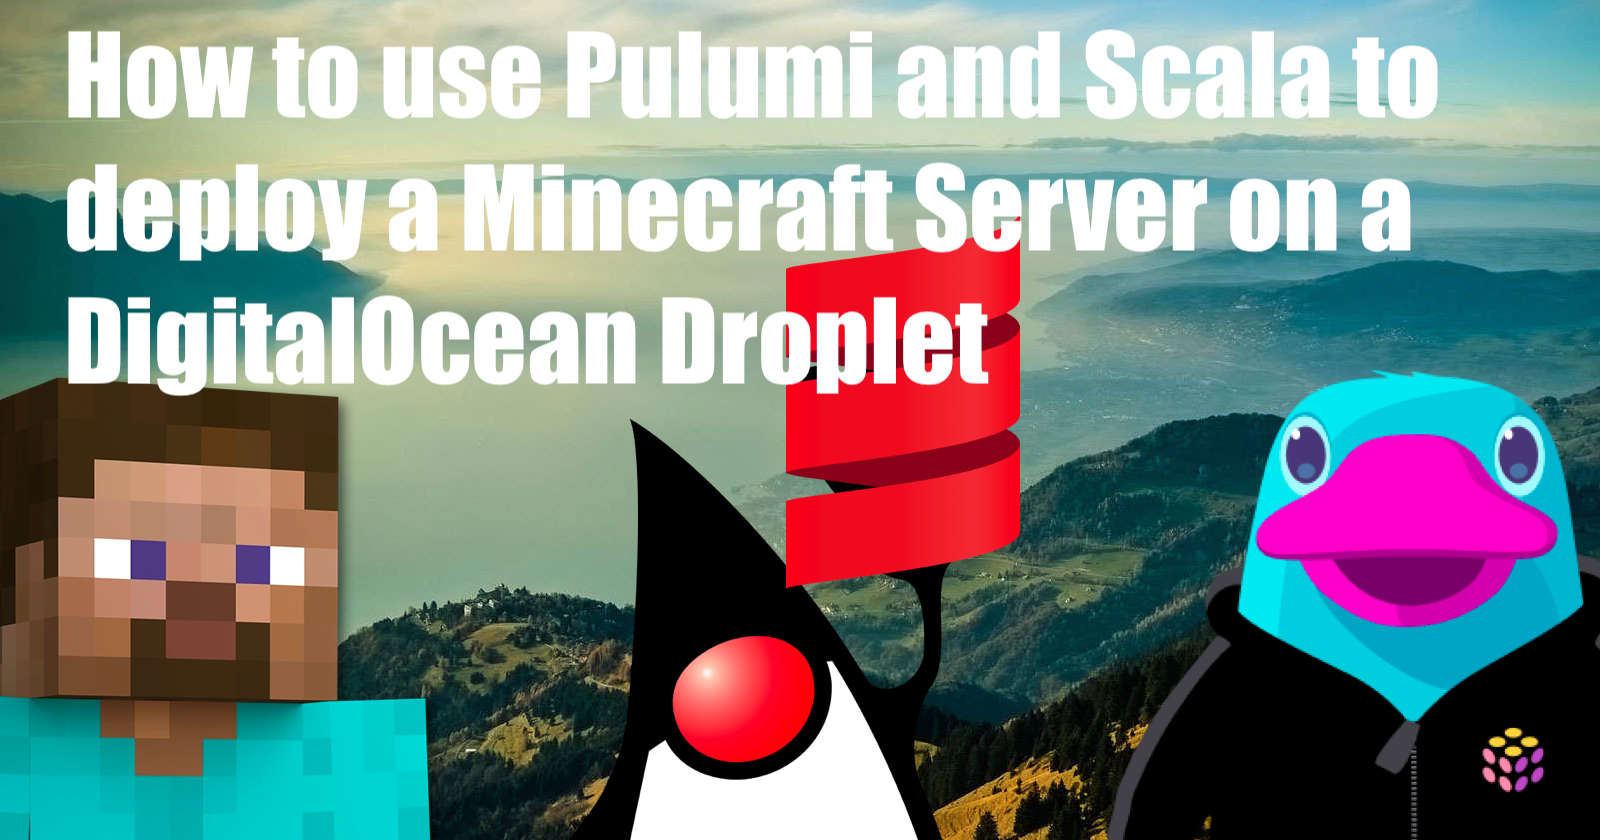 Cataract hul Parat How to use Pulumi and Scala to deploy a Minecraft Server on a DigitalOcean  Droplet